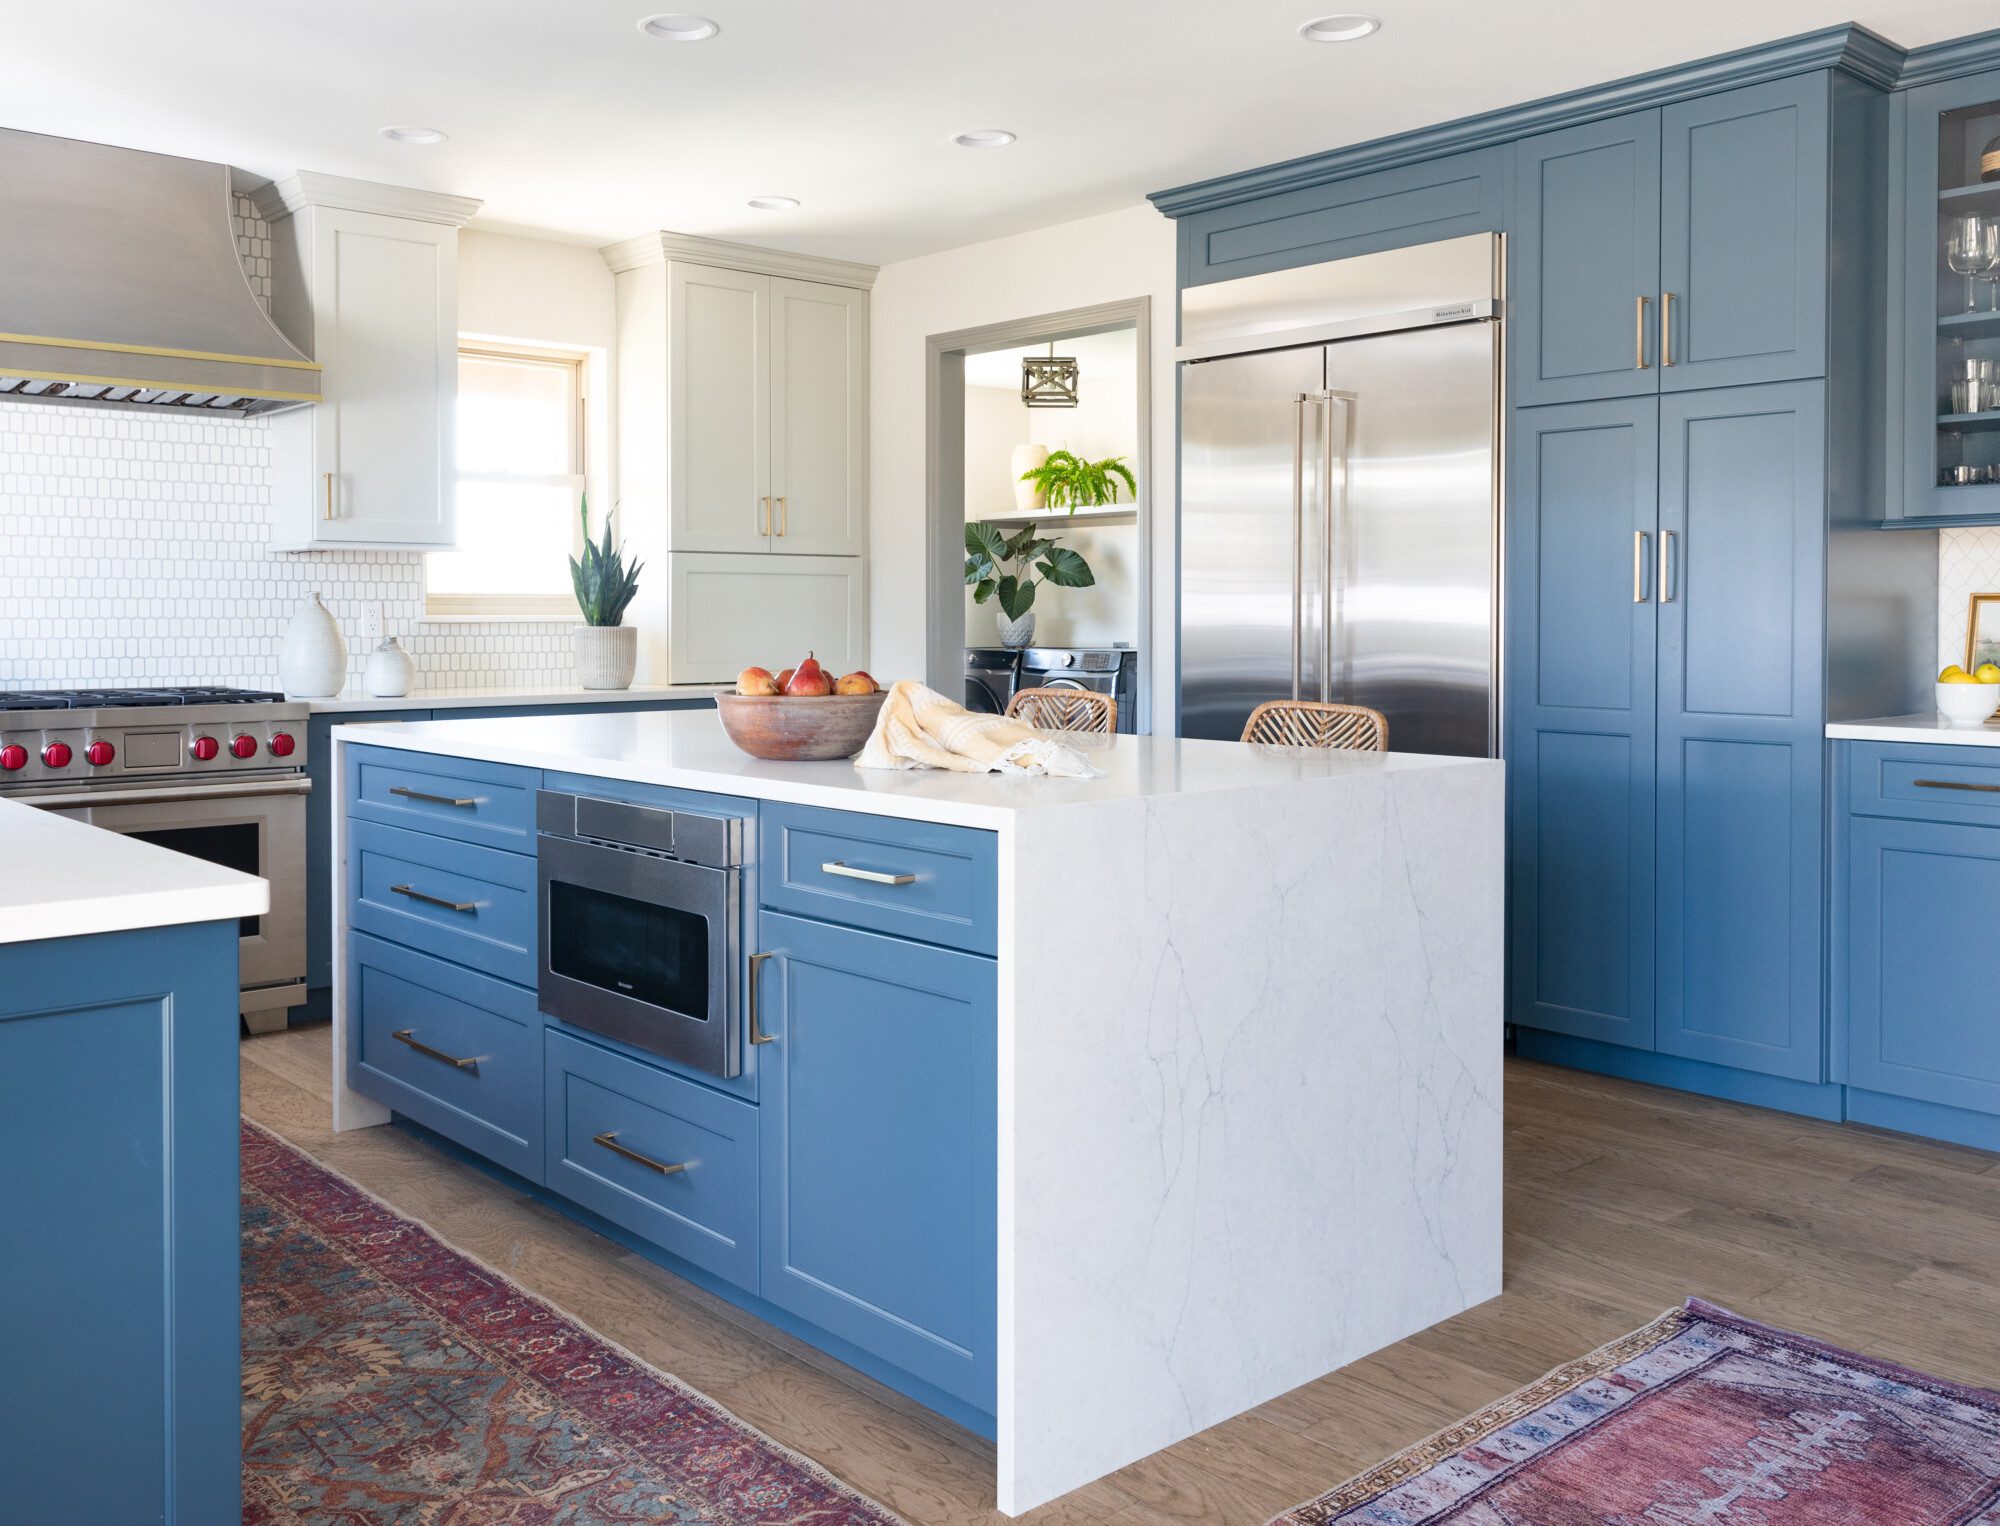 a marble waterfall island and blue cabinets really make this kitchen pop!